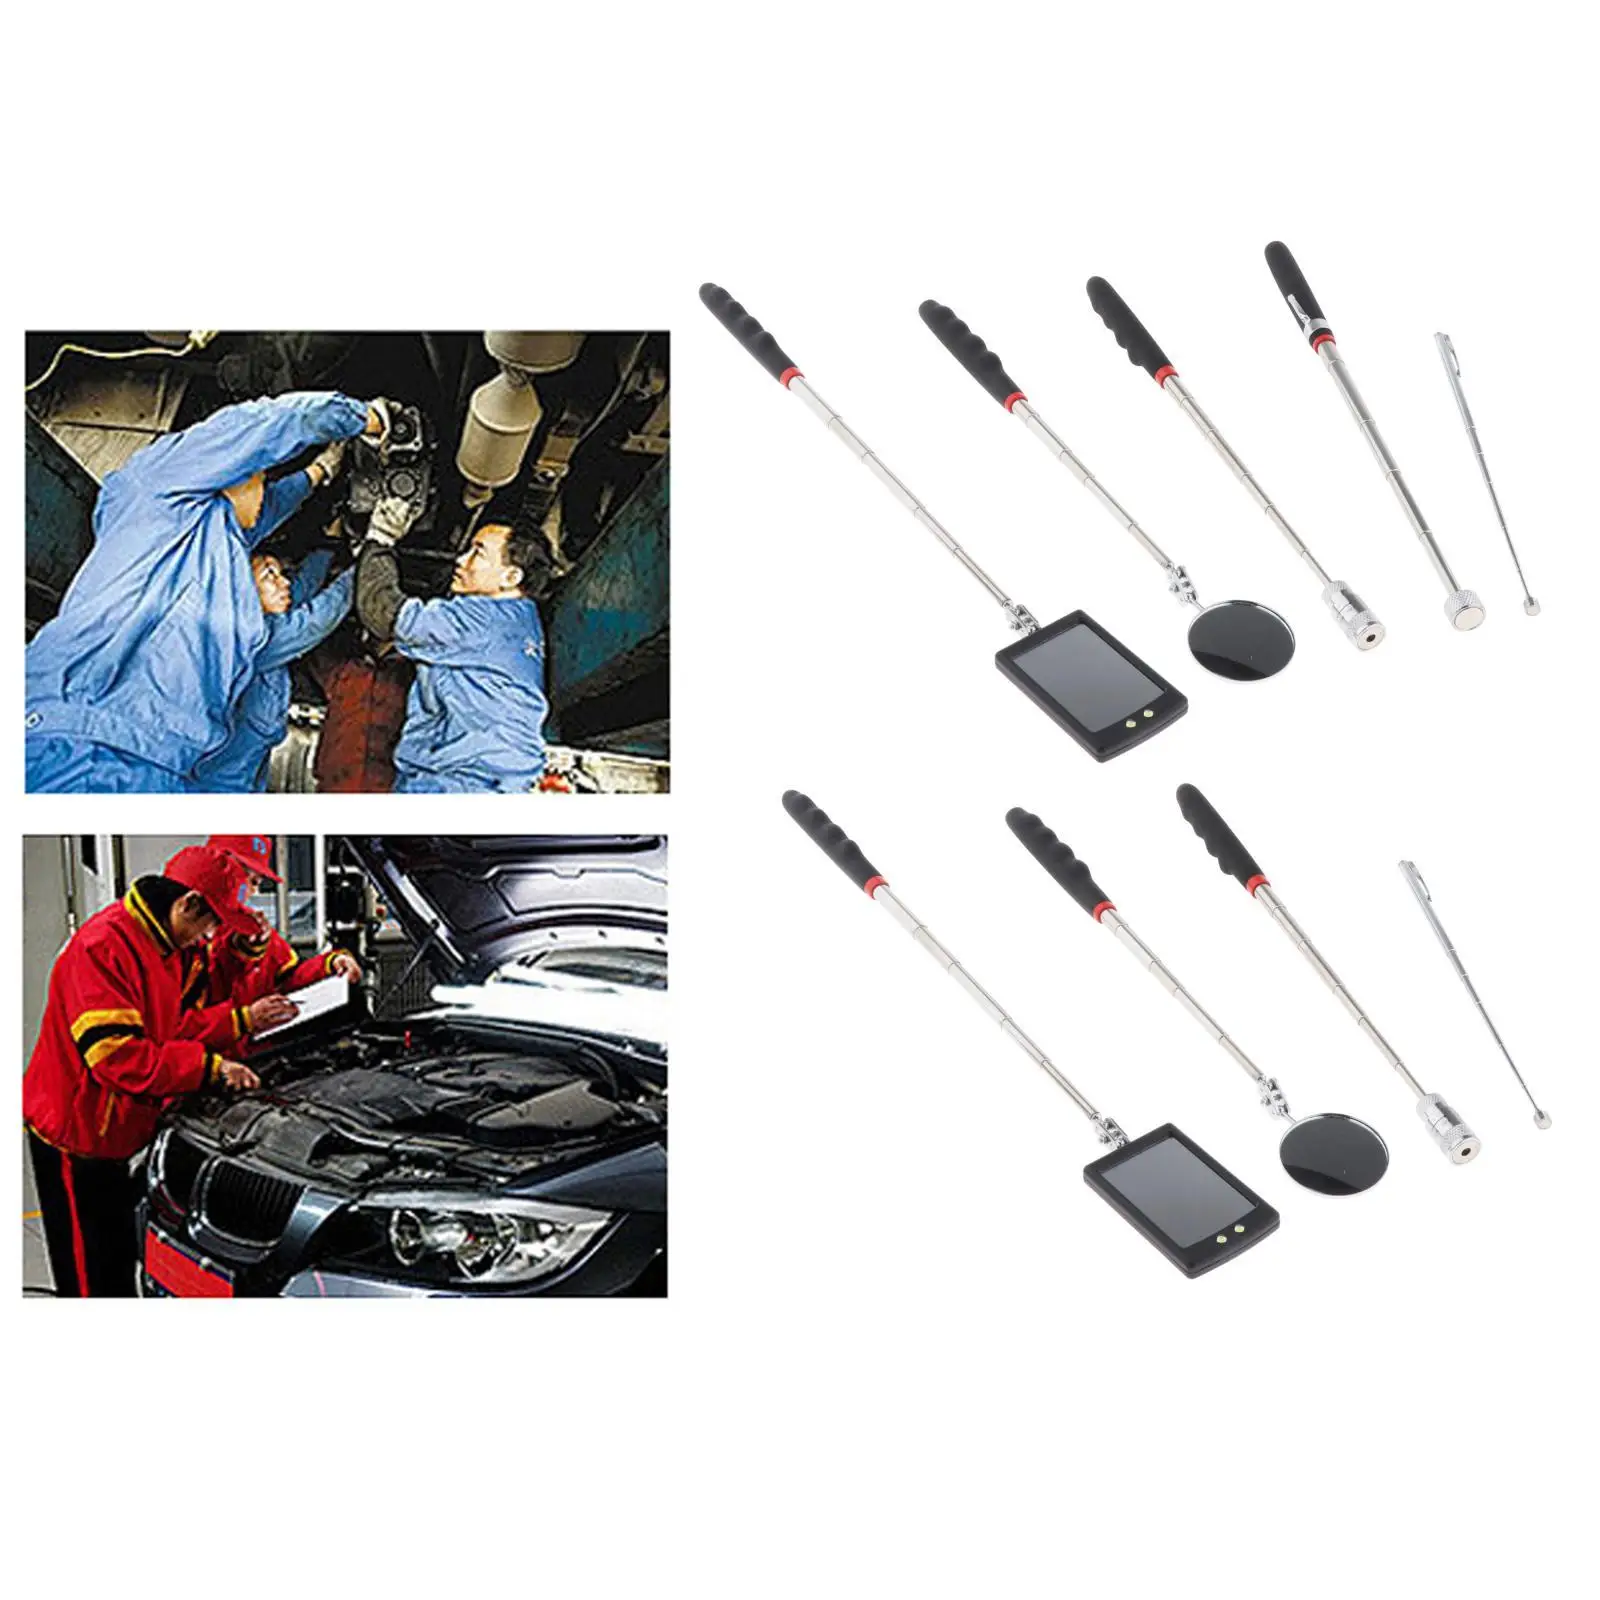 Telescoping Pick-, Retractable, with Handle, Portable with Pick up Rod Hand for Car Maintenance